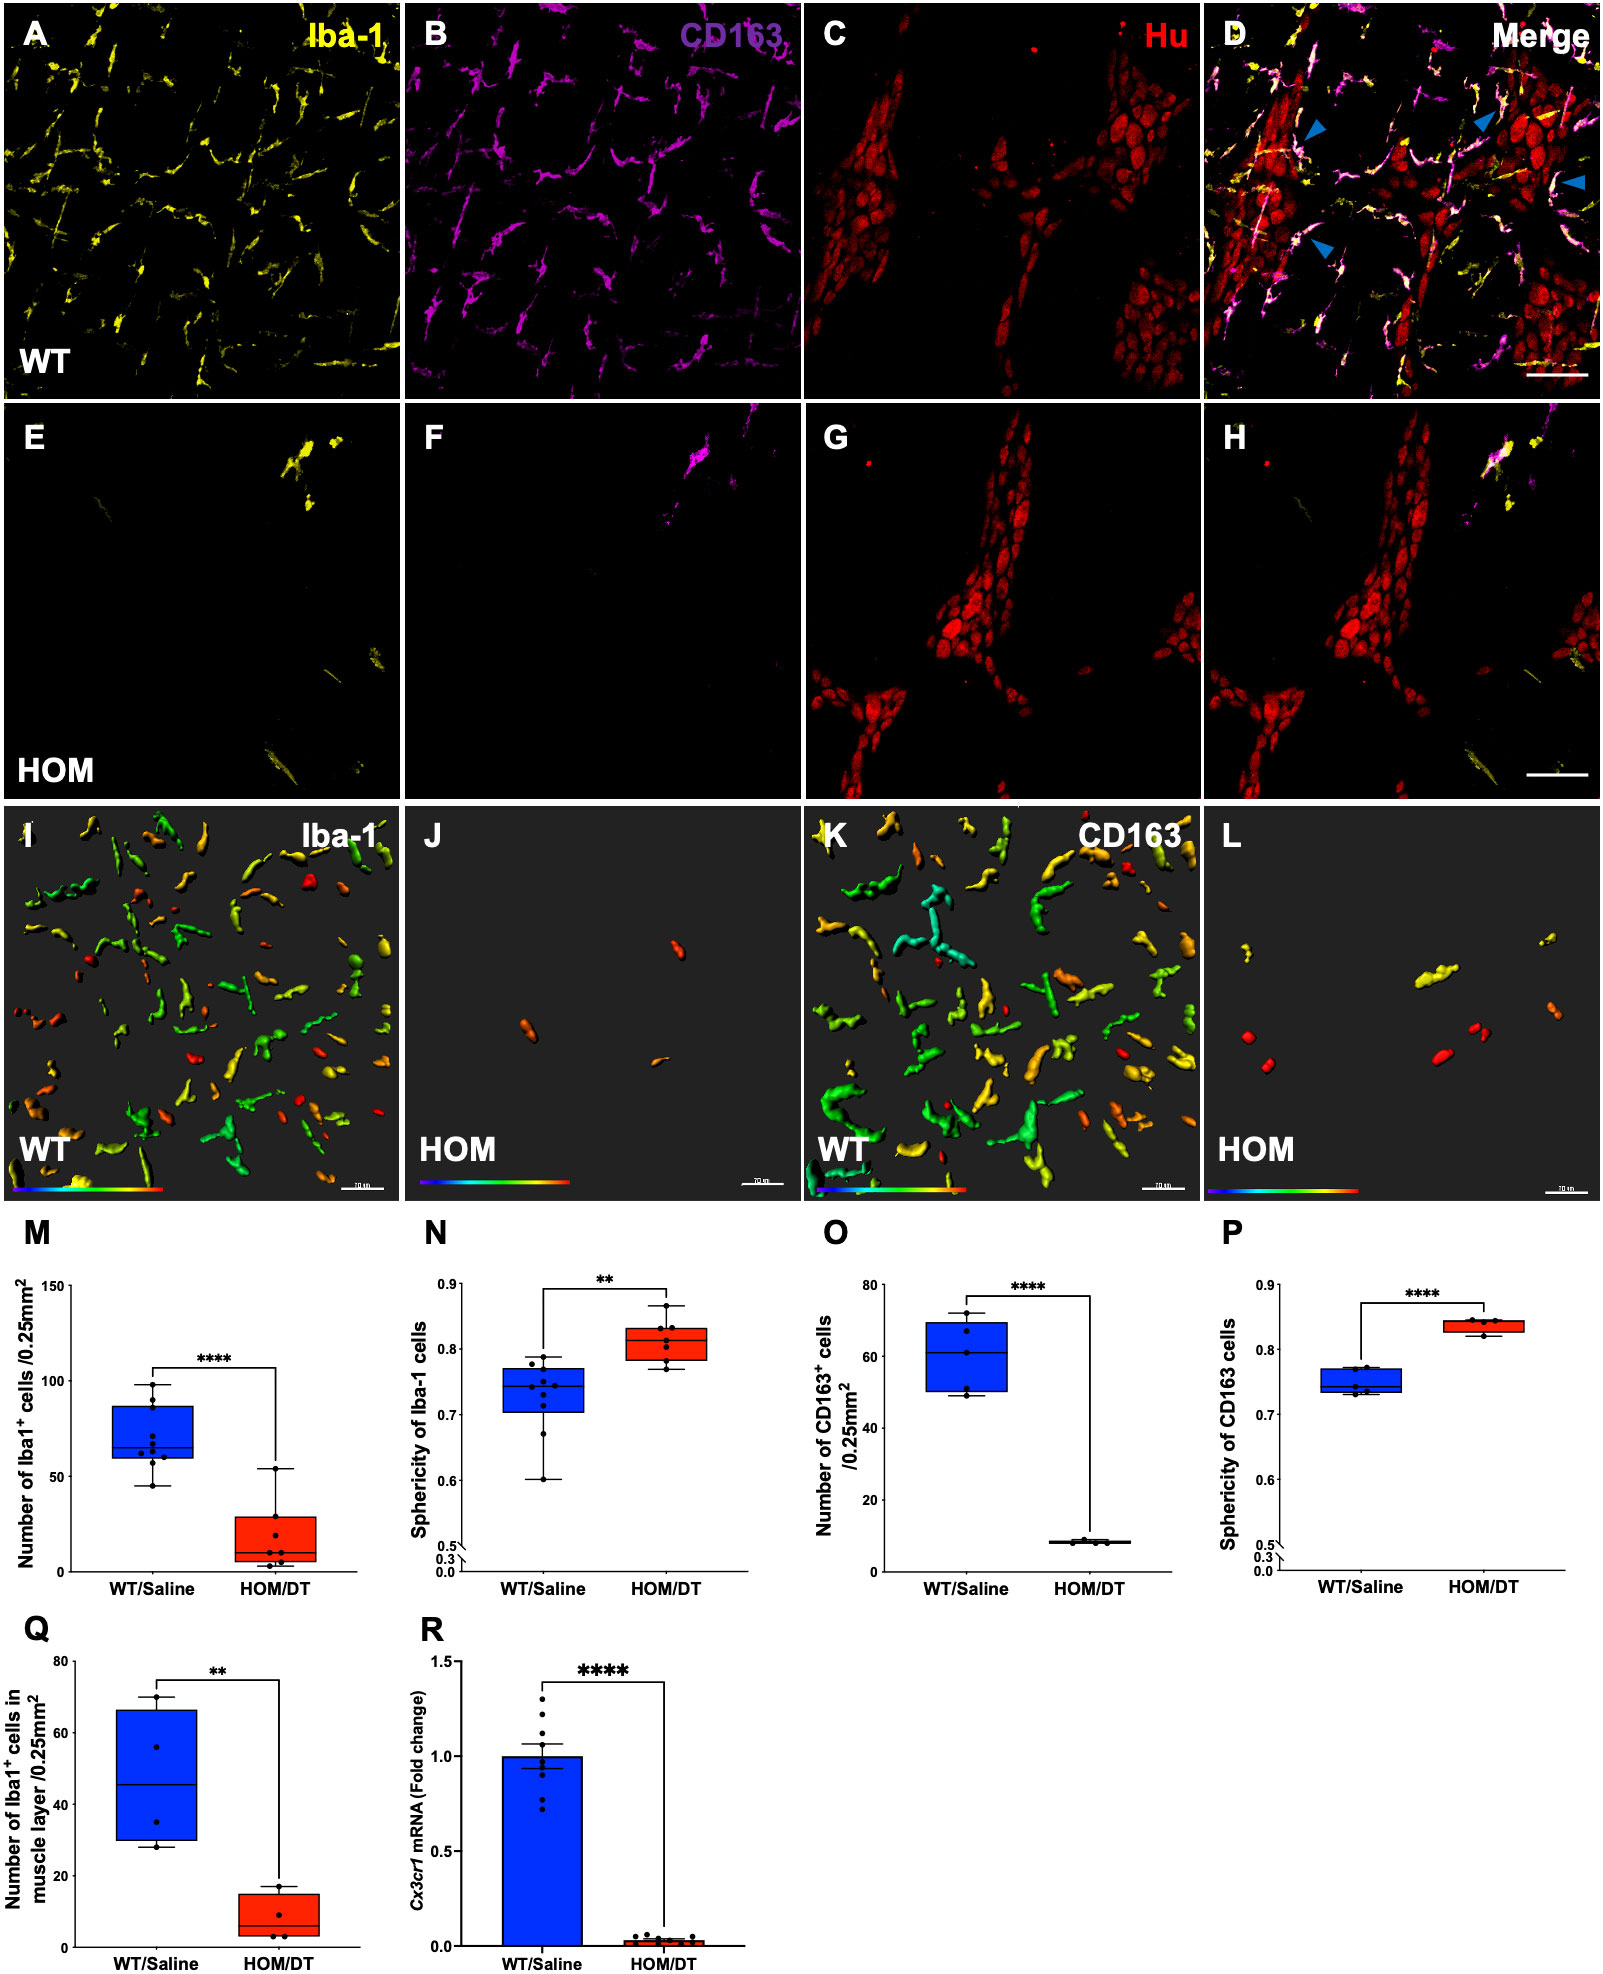 with of model | CD163 “second evidence colonic motility Frontiers the interneurons regulation Cx3cr1-Dtr to interact Macrophage brain”: intestinal from regulate the macrophages inhibitory rat -